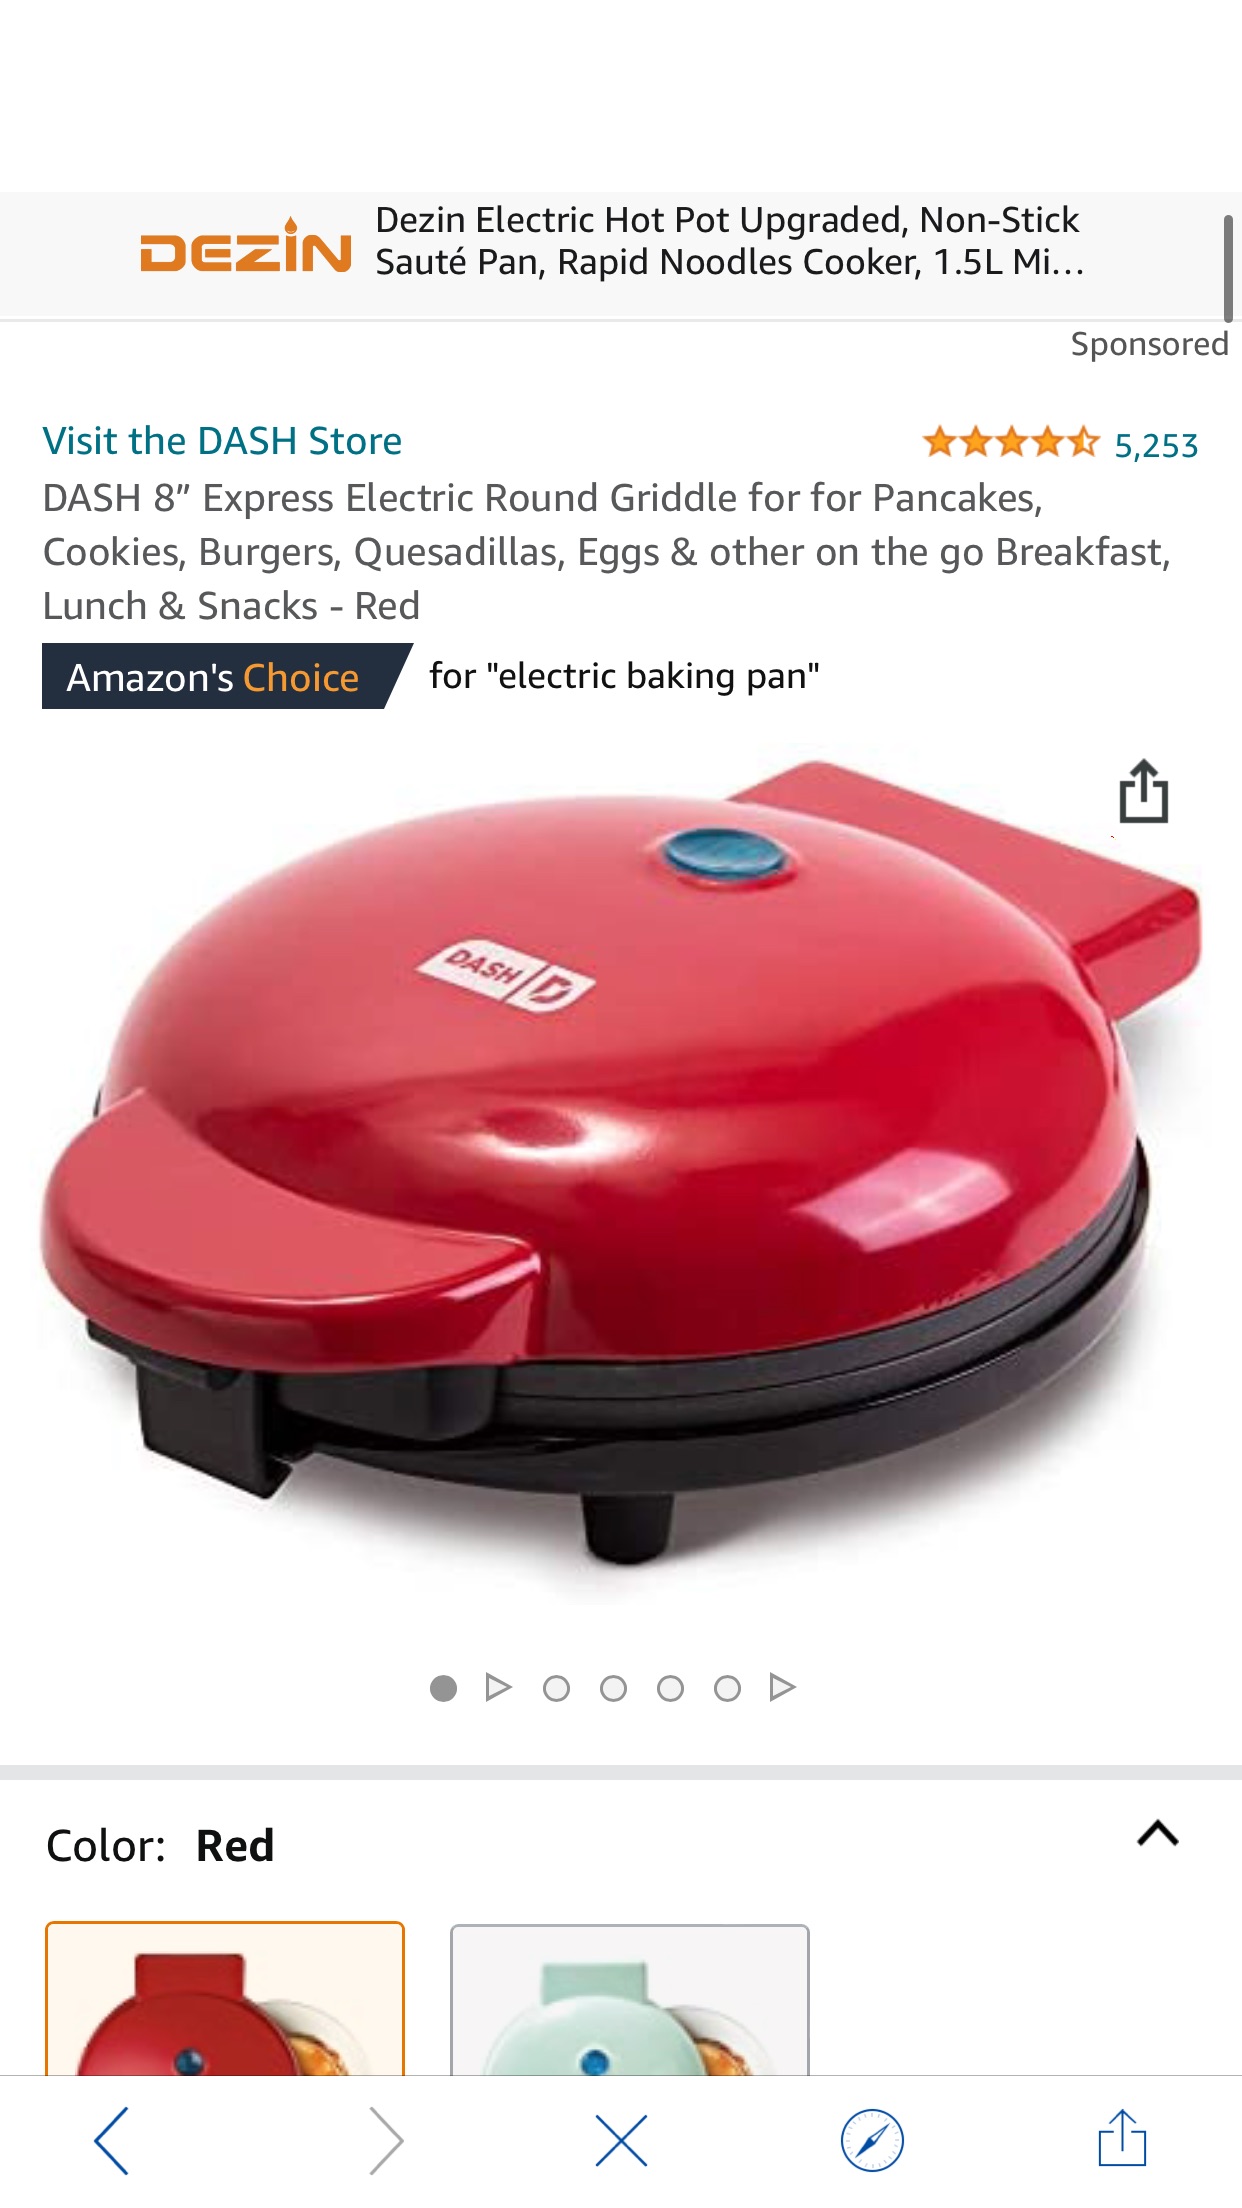 Amazon.com: DASH 8” Express Electric Round Griddle for for Pancakes